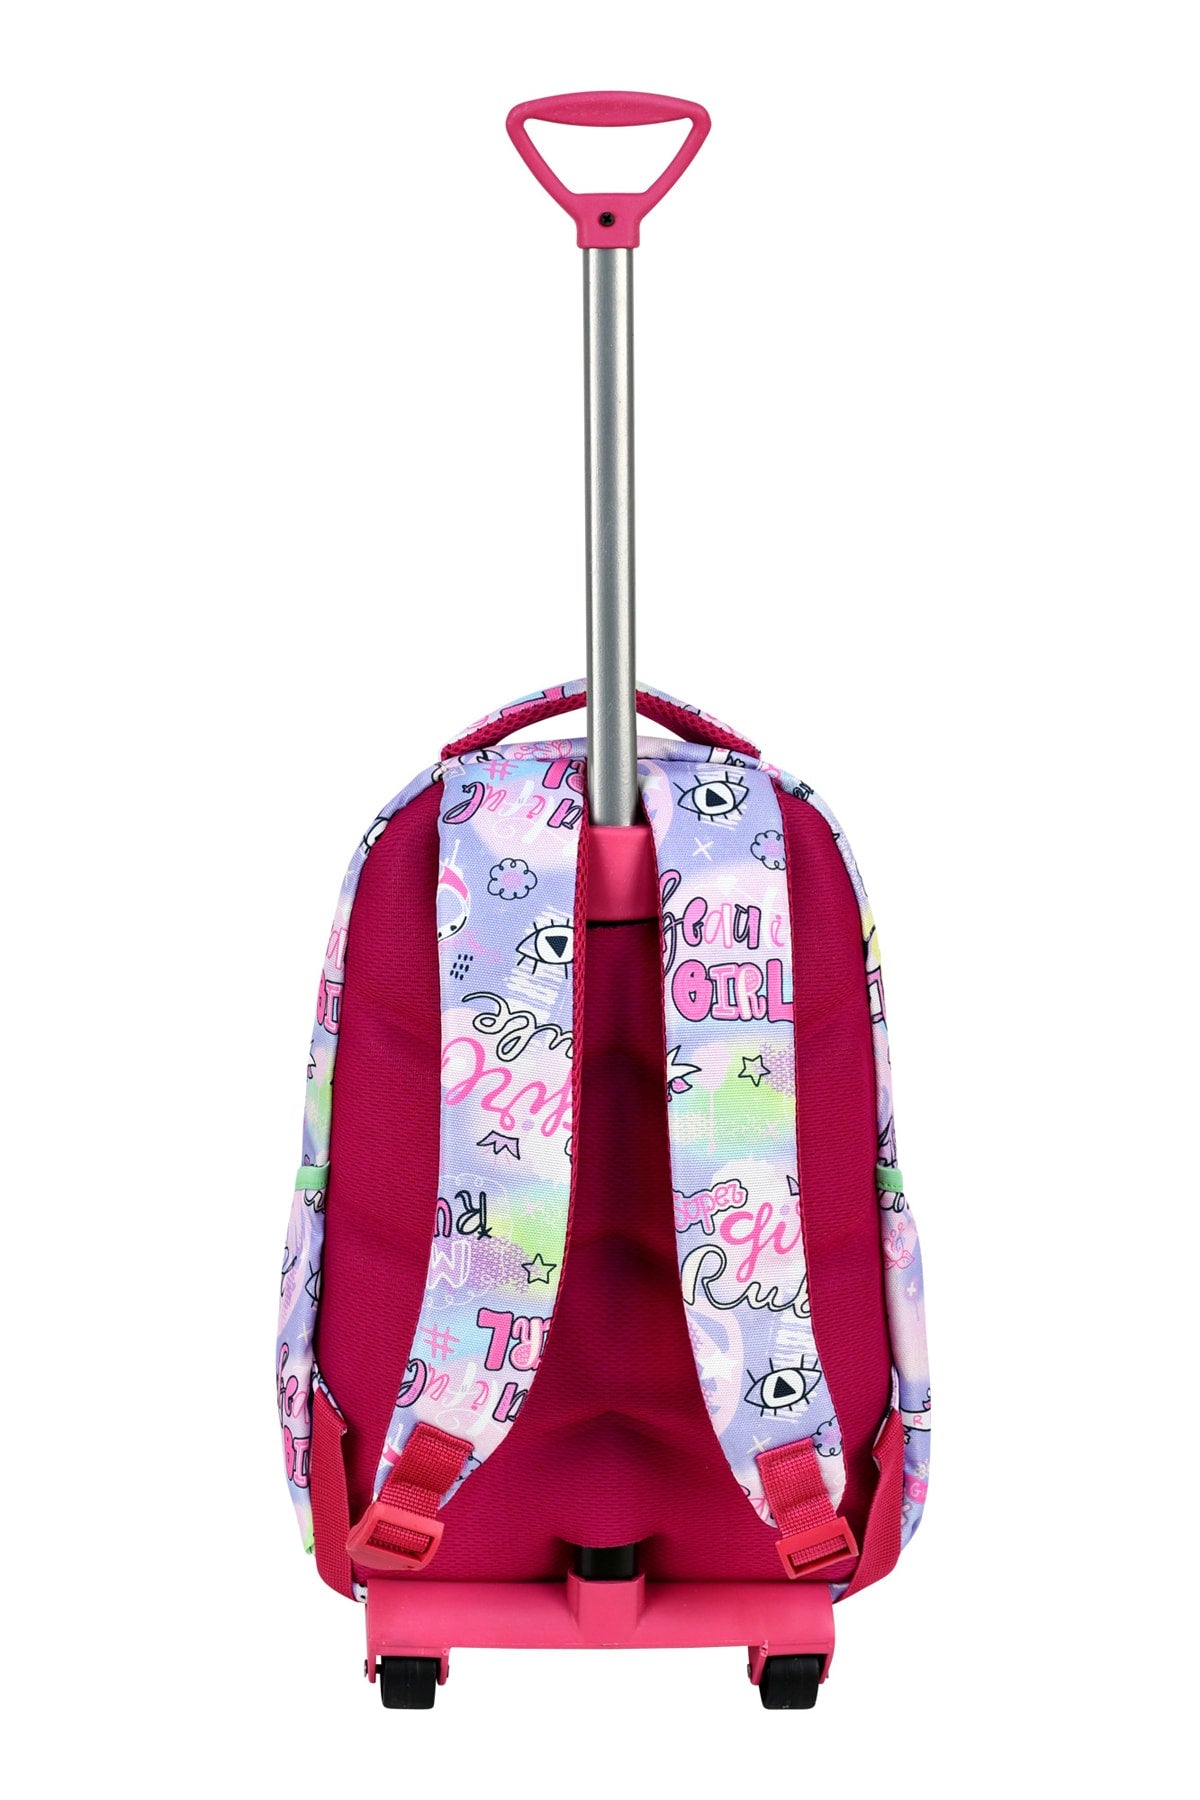 3-pack School Set with Squeegee, Girl Patterned Primary School Bag + Lunch Box + Pencil Holder